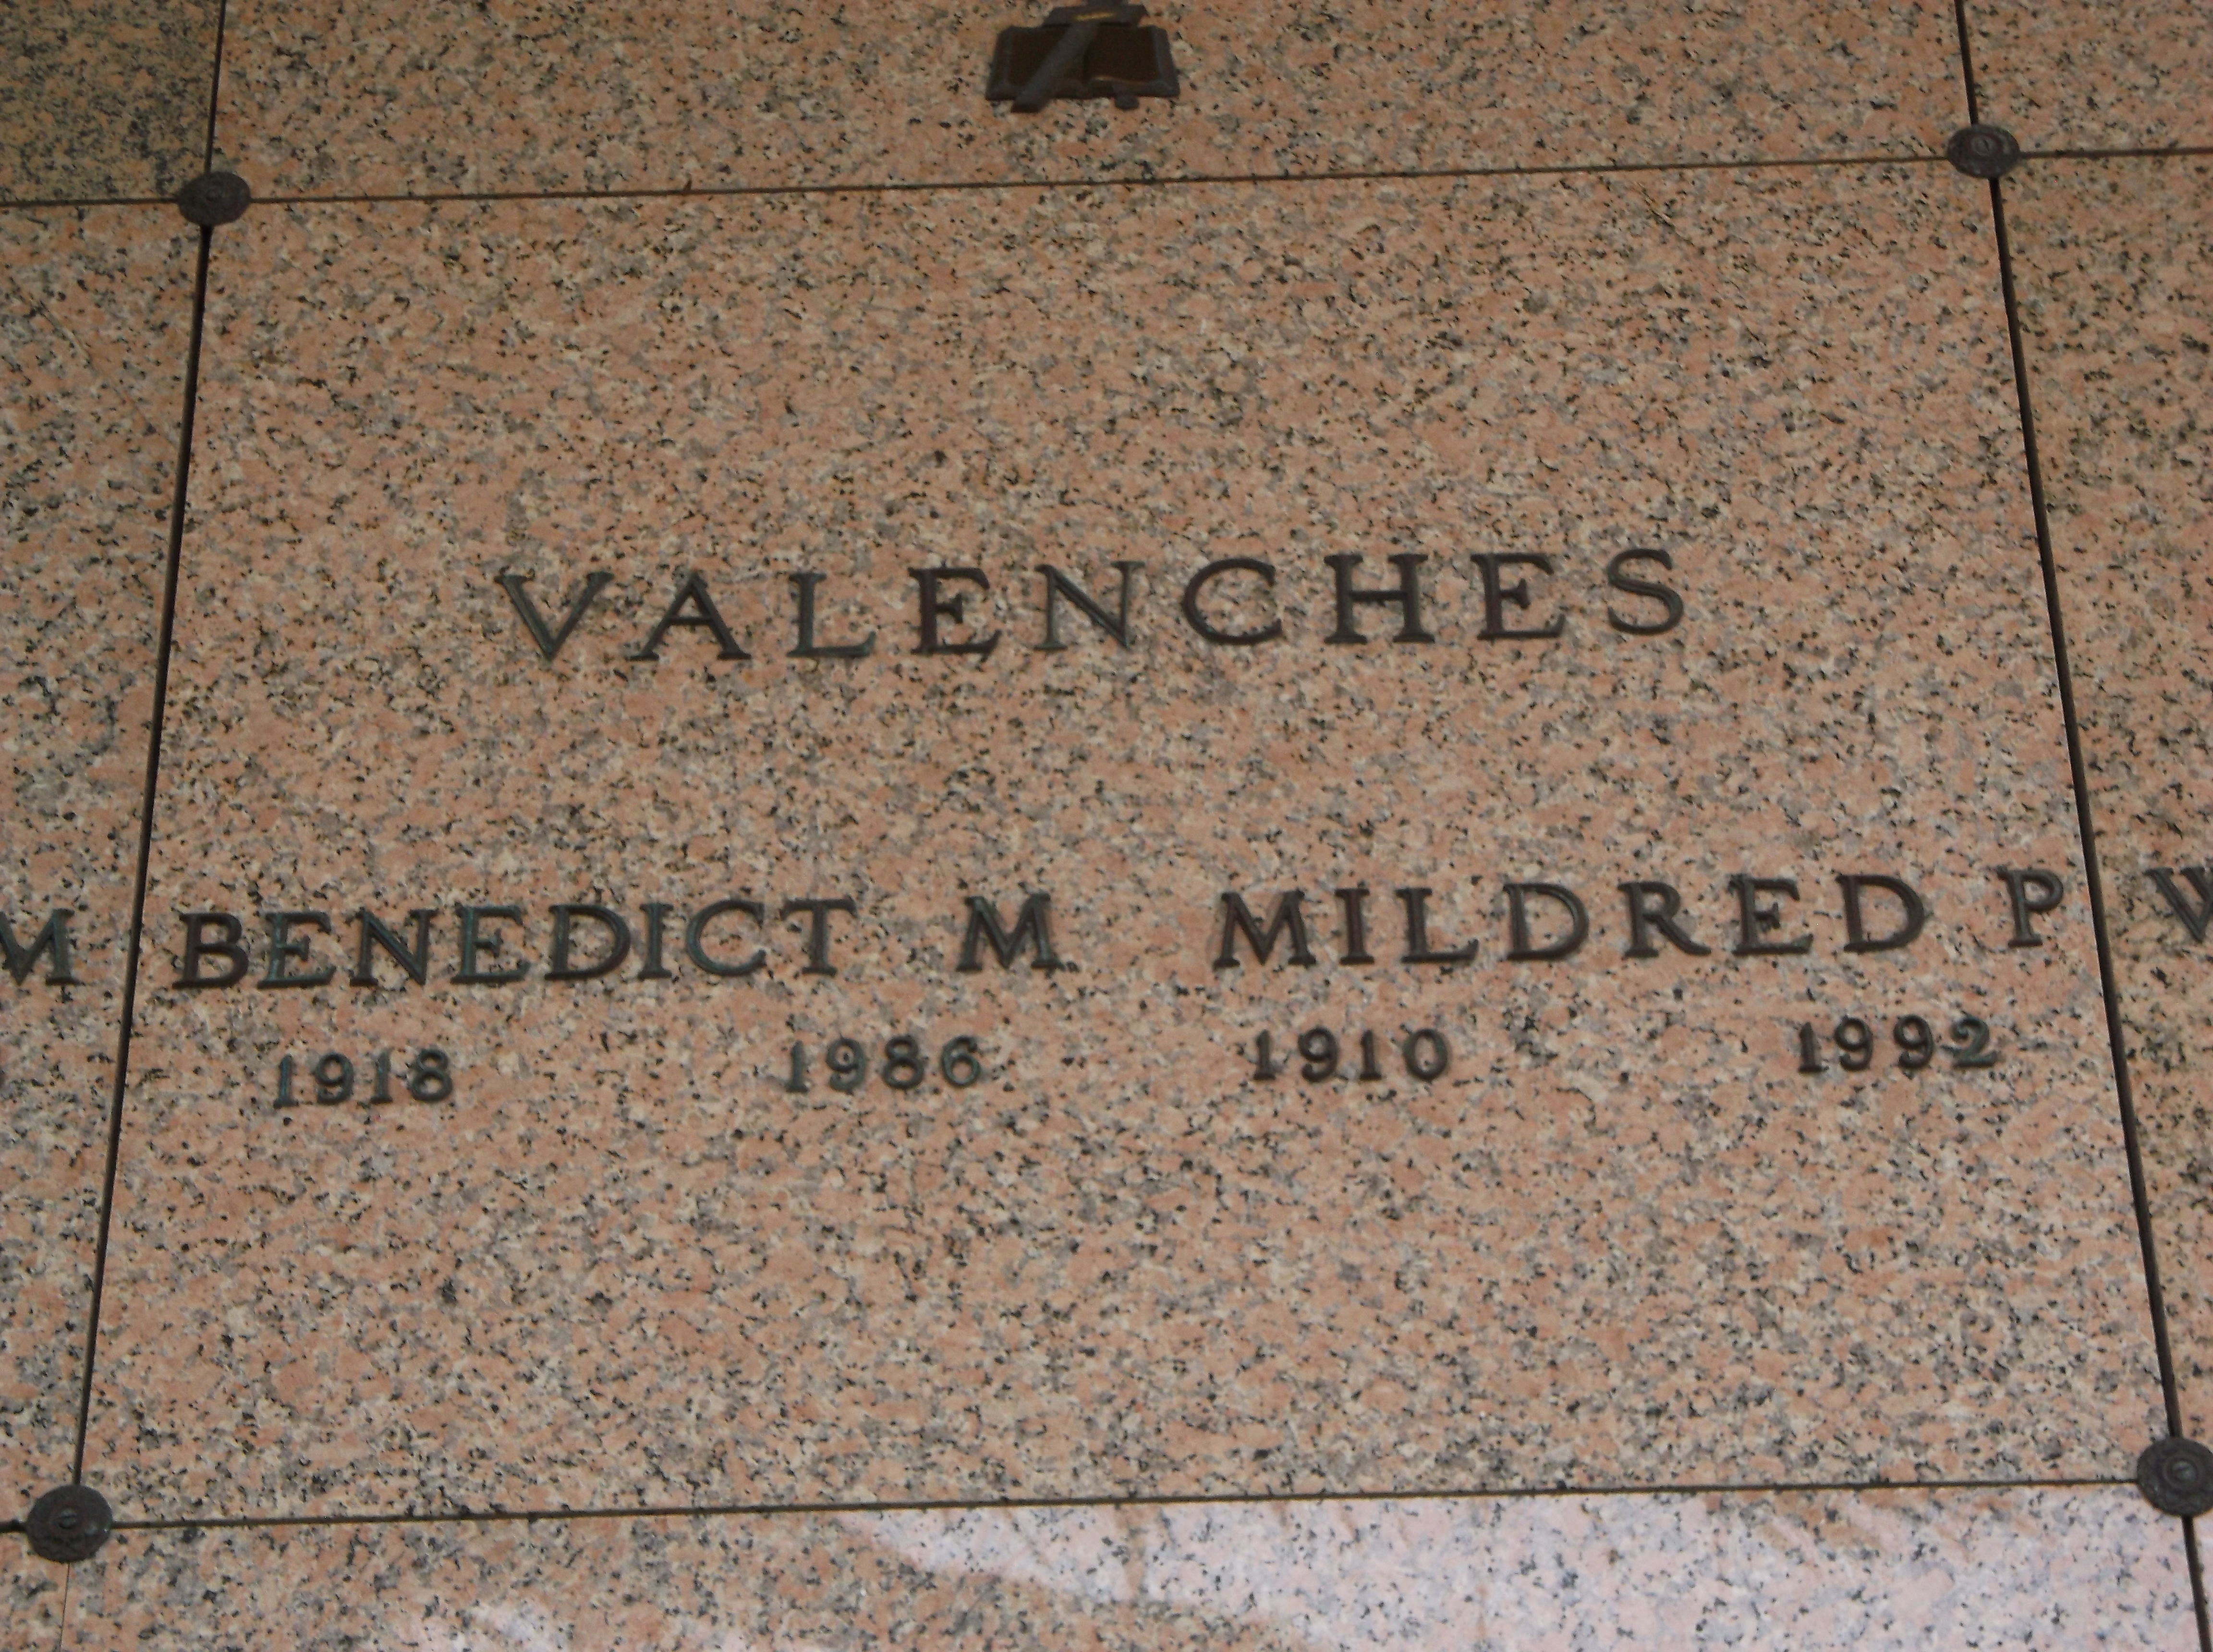 Mildred P Valenches